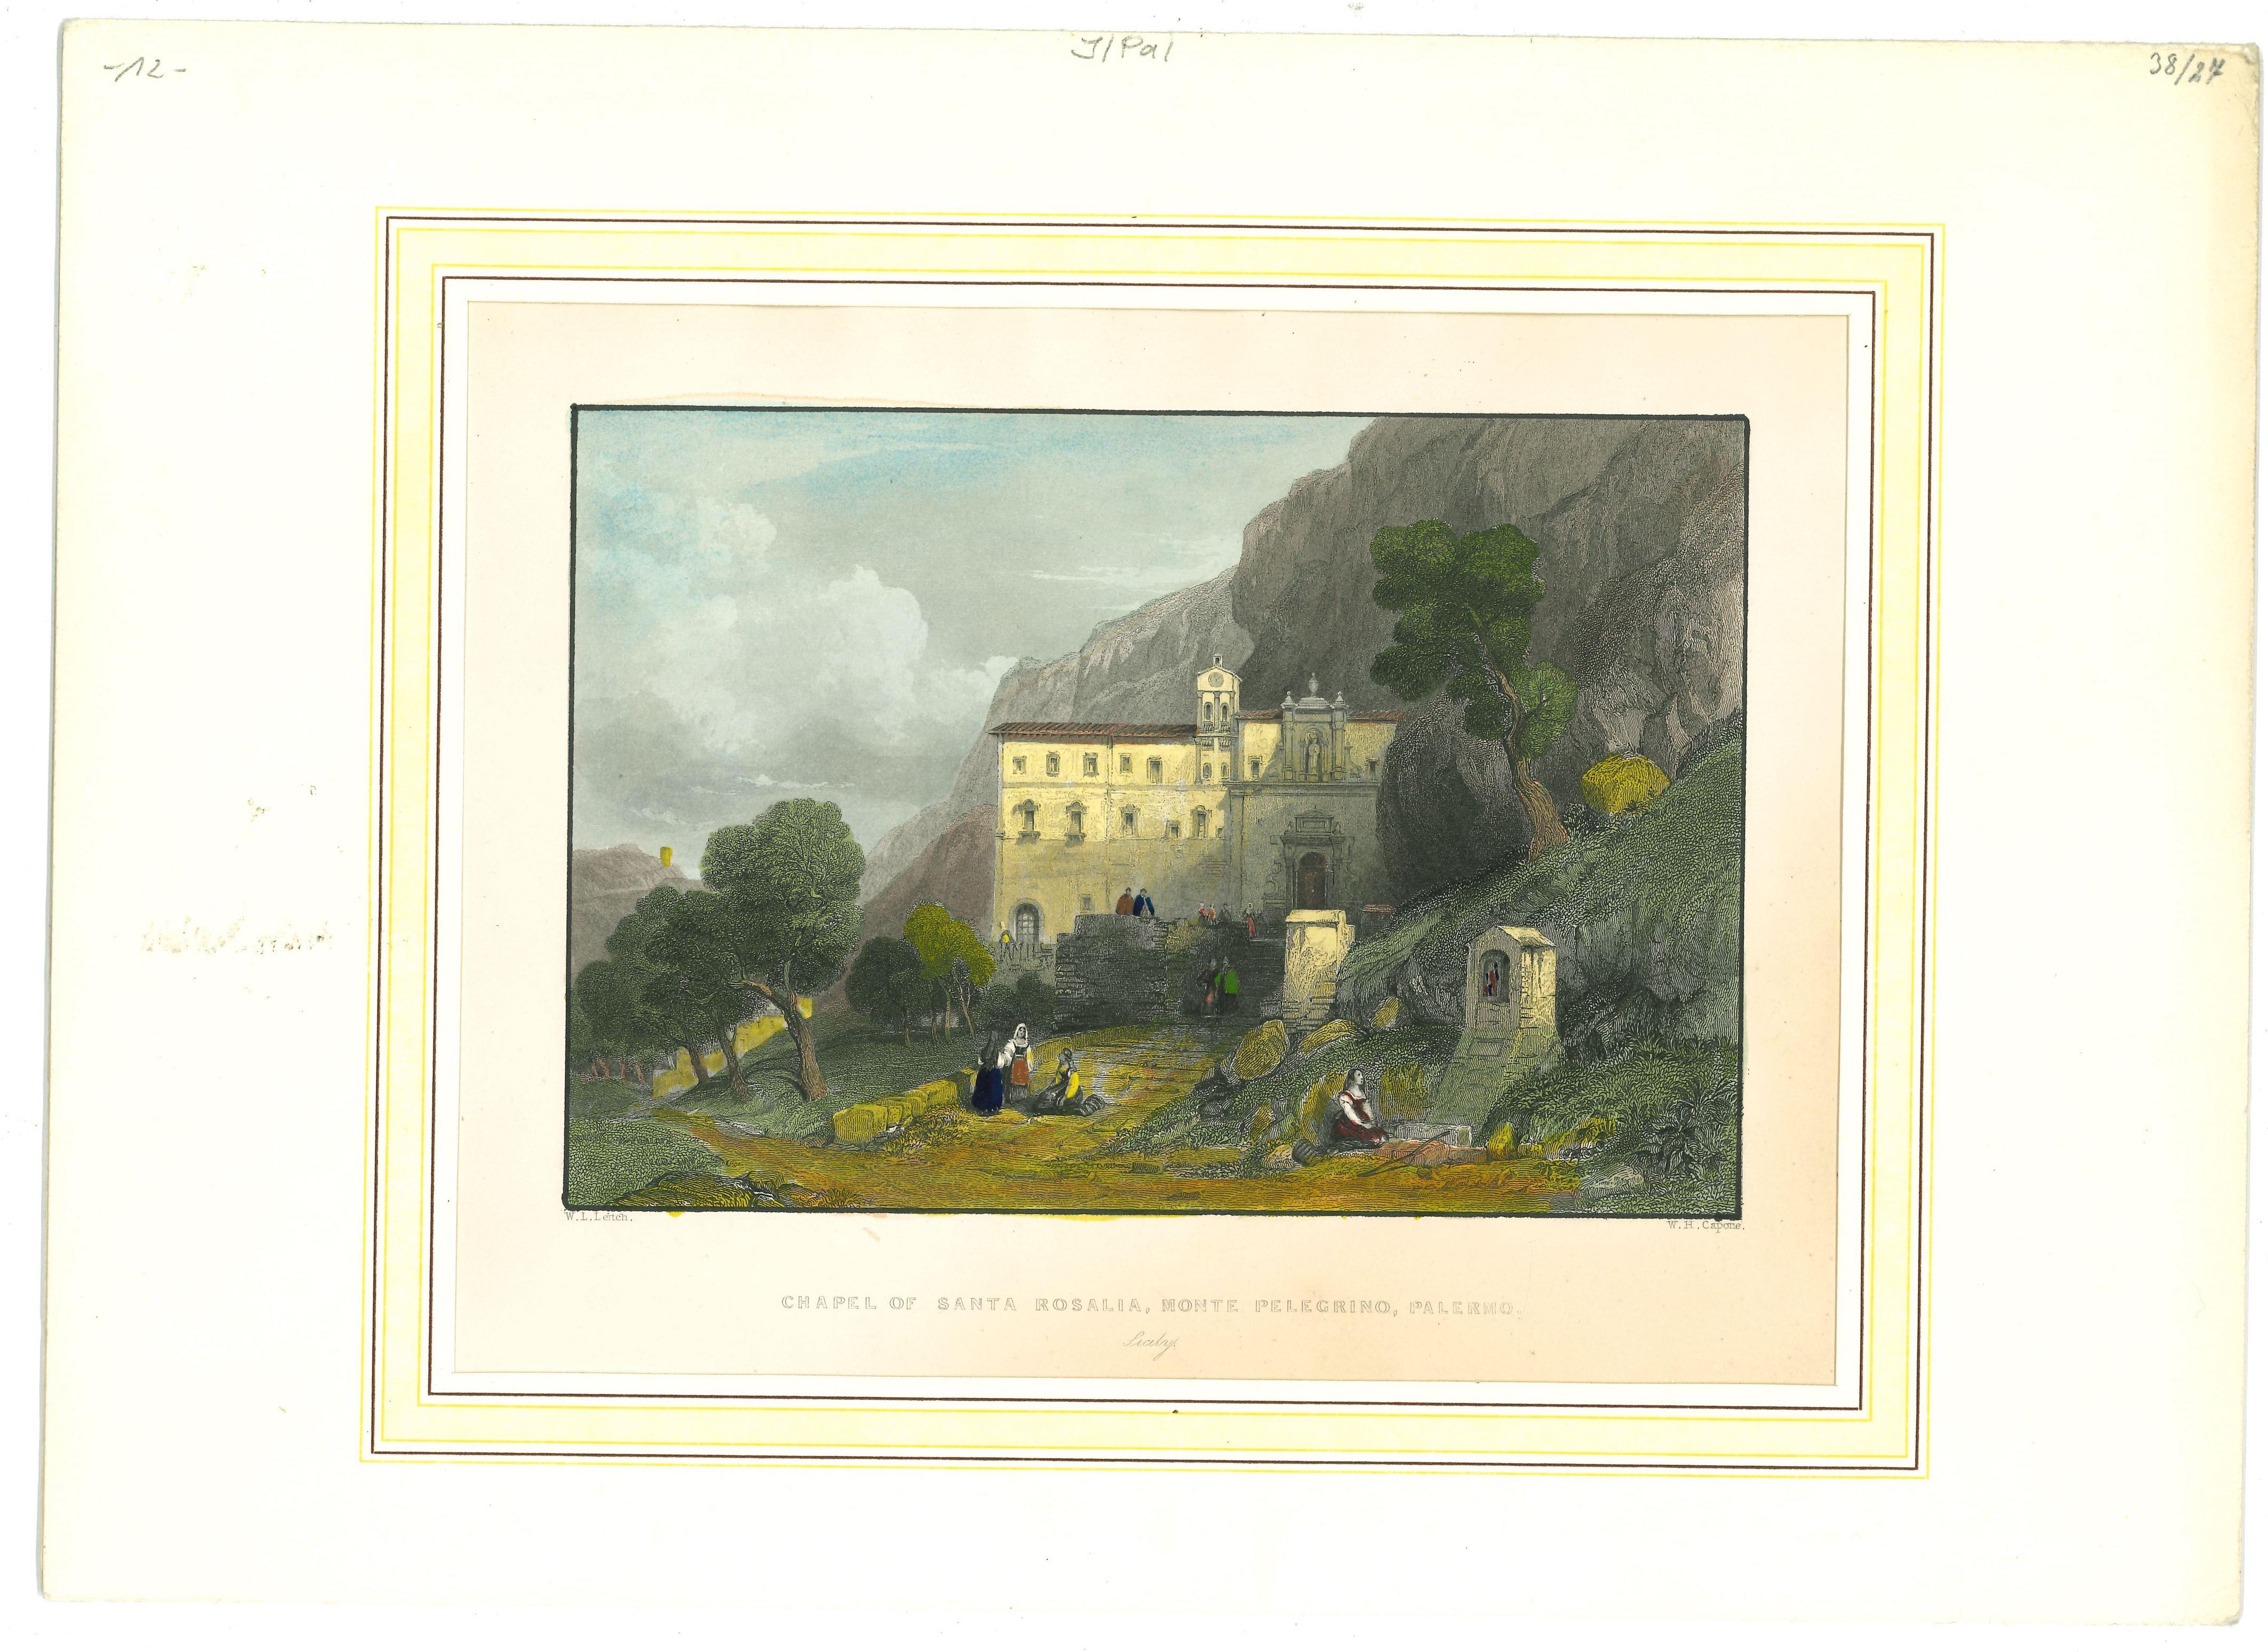 Unknown Figurative Print - Ancient View of Chapel of Santa Rosalia- Lithograph on Paper - Mid-19th Century